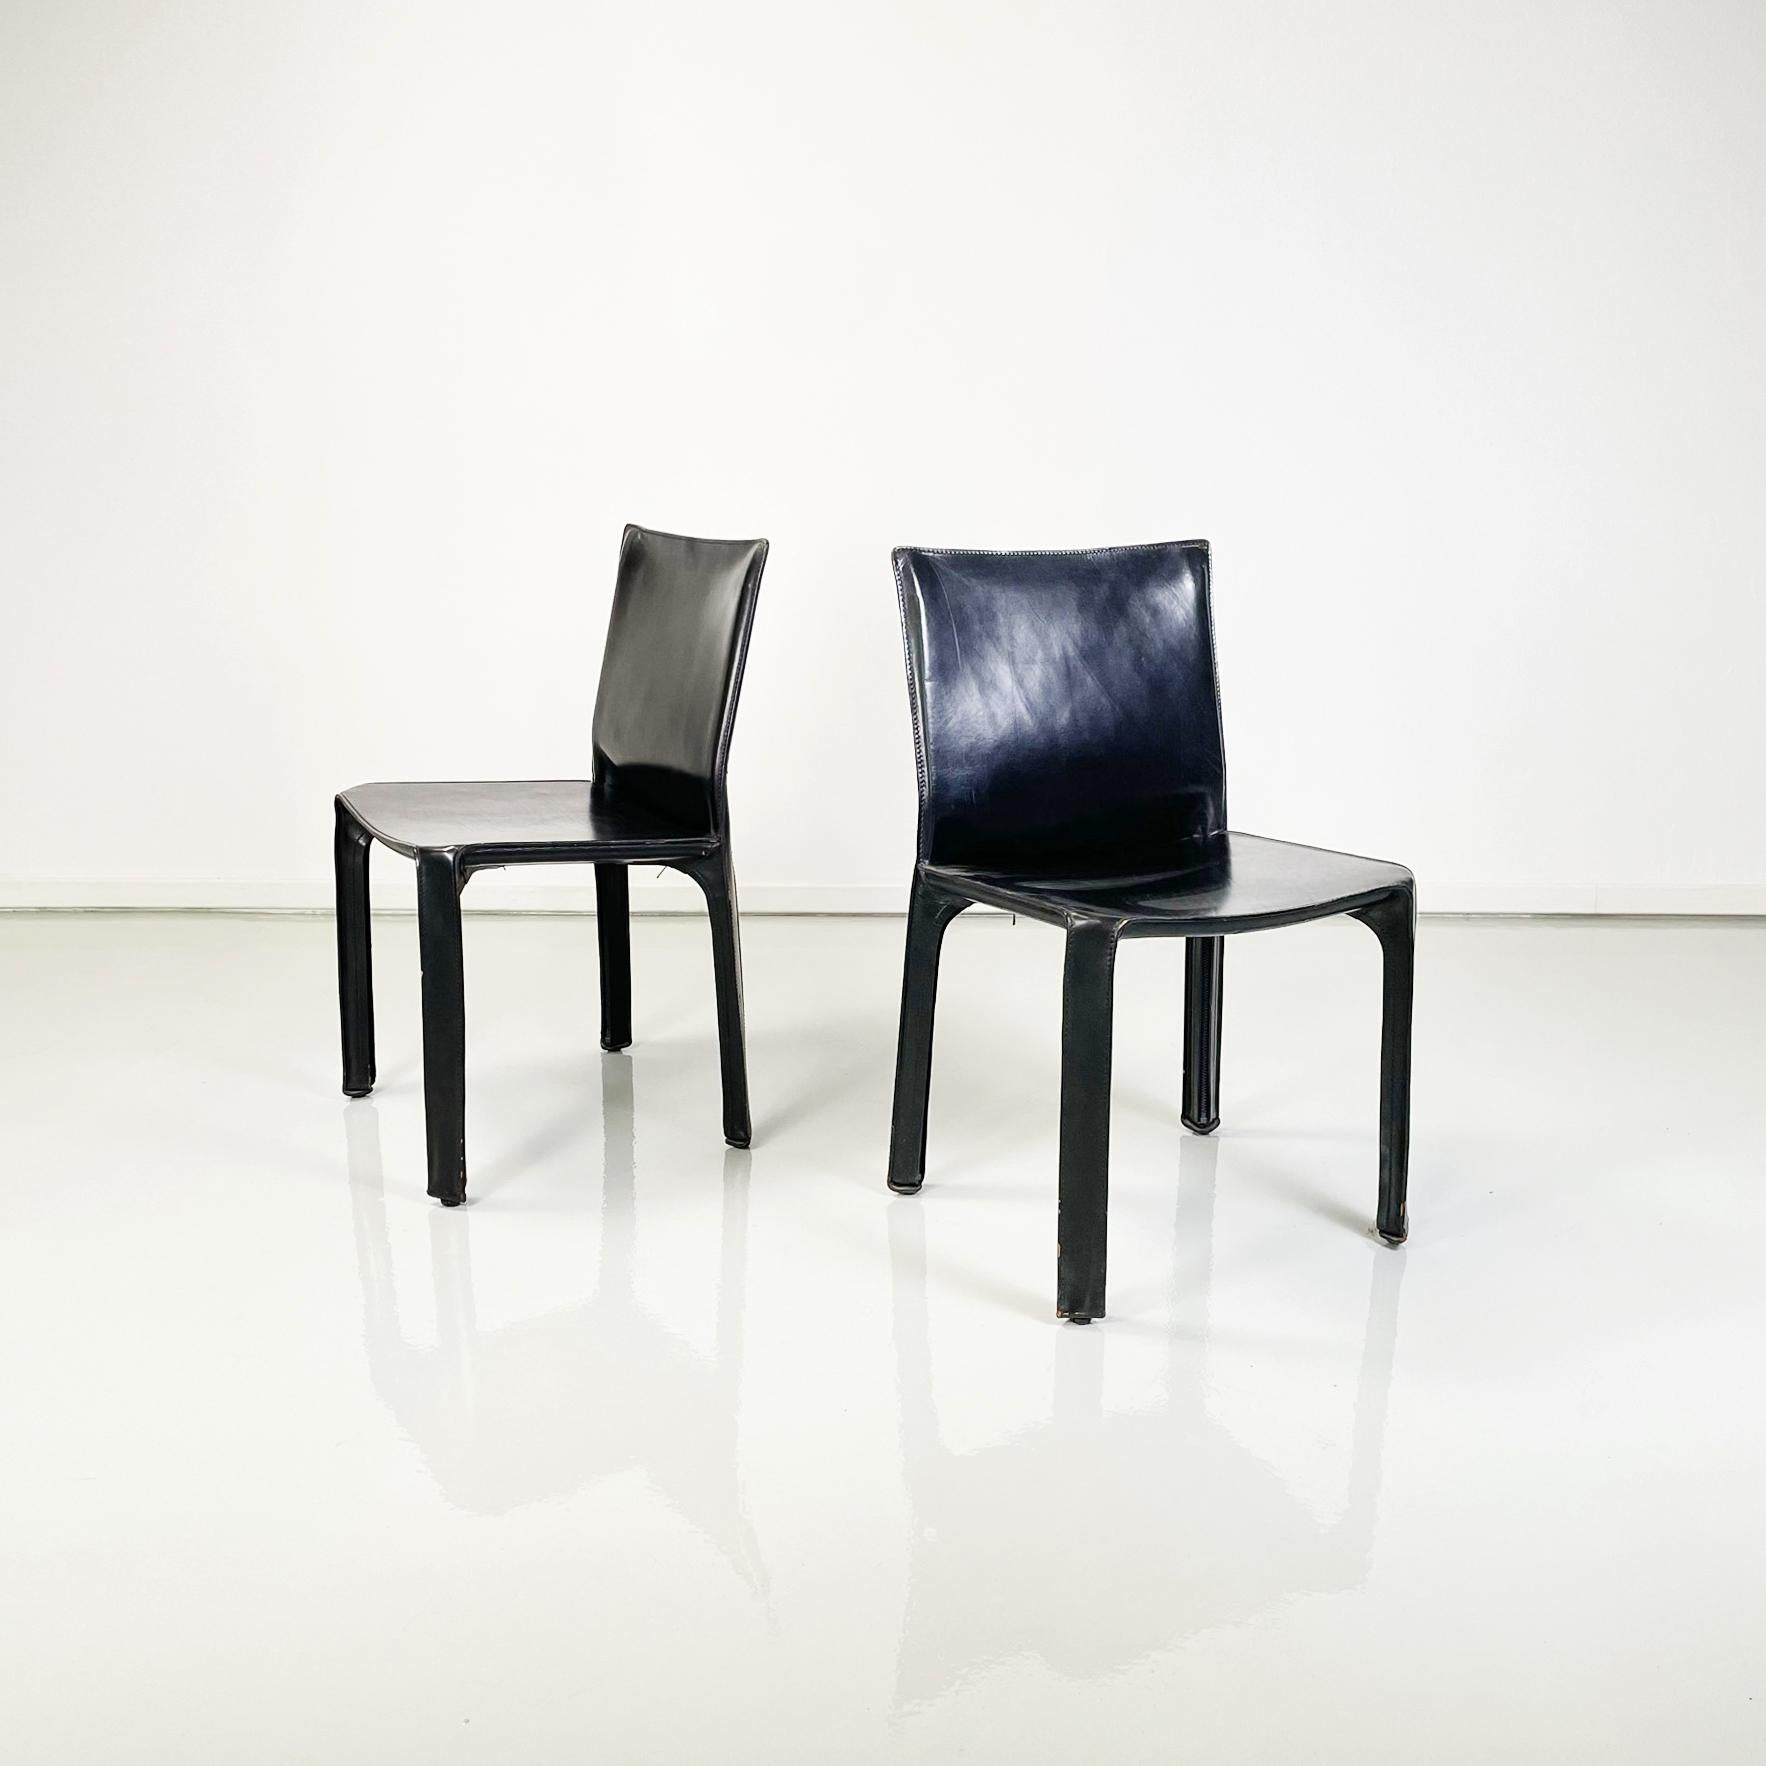 Italian modern Leather chairs mod CAB 414 by Mario Bellini for Cassina, 1980s 
Set of fantastic and comfortable 6 chair mod. CAB 412 in black leather. The leather follows the shapes of the seat, back and square legs. Exposed seams. Under the seat